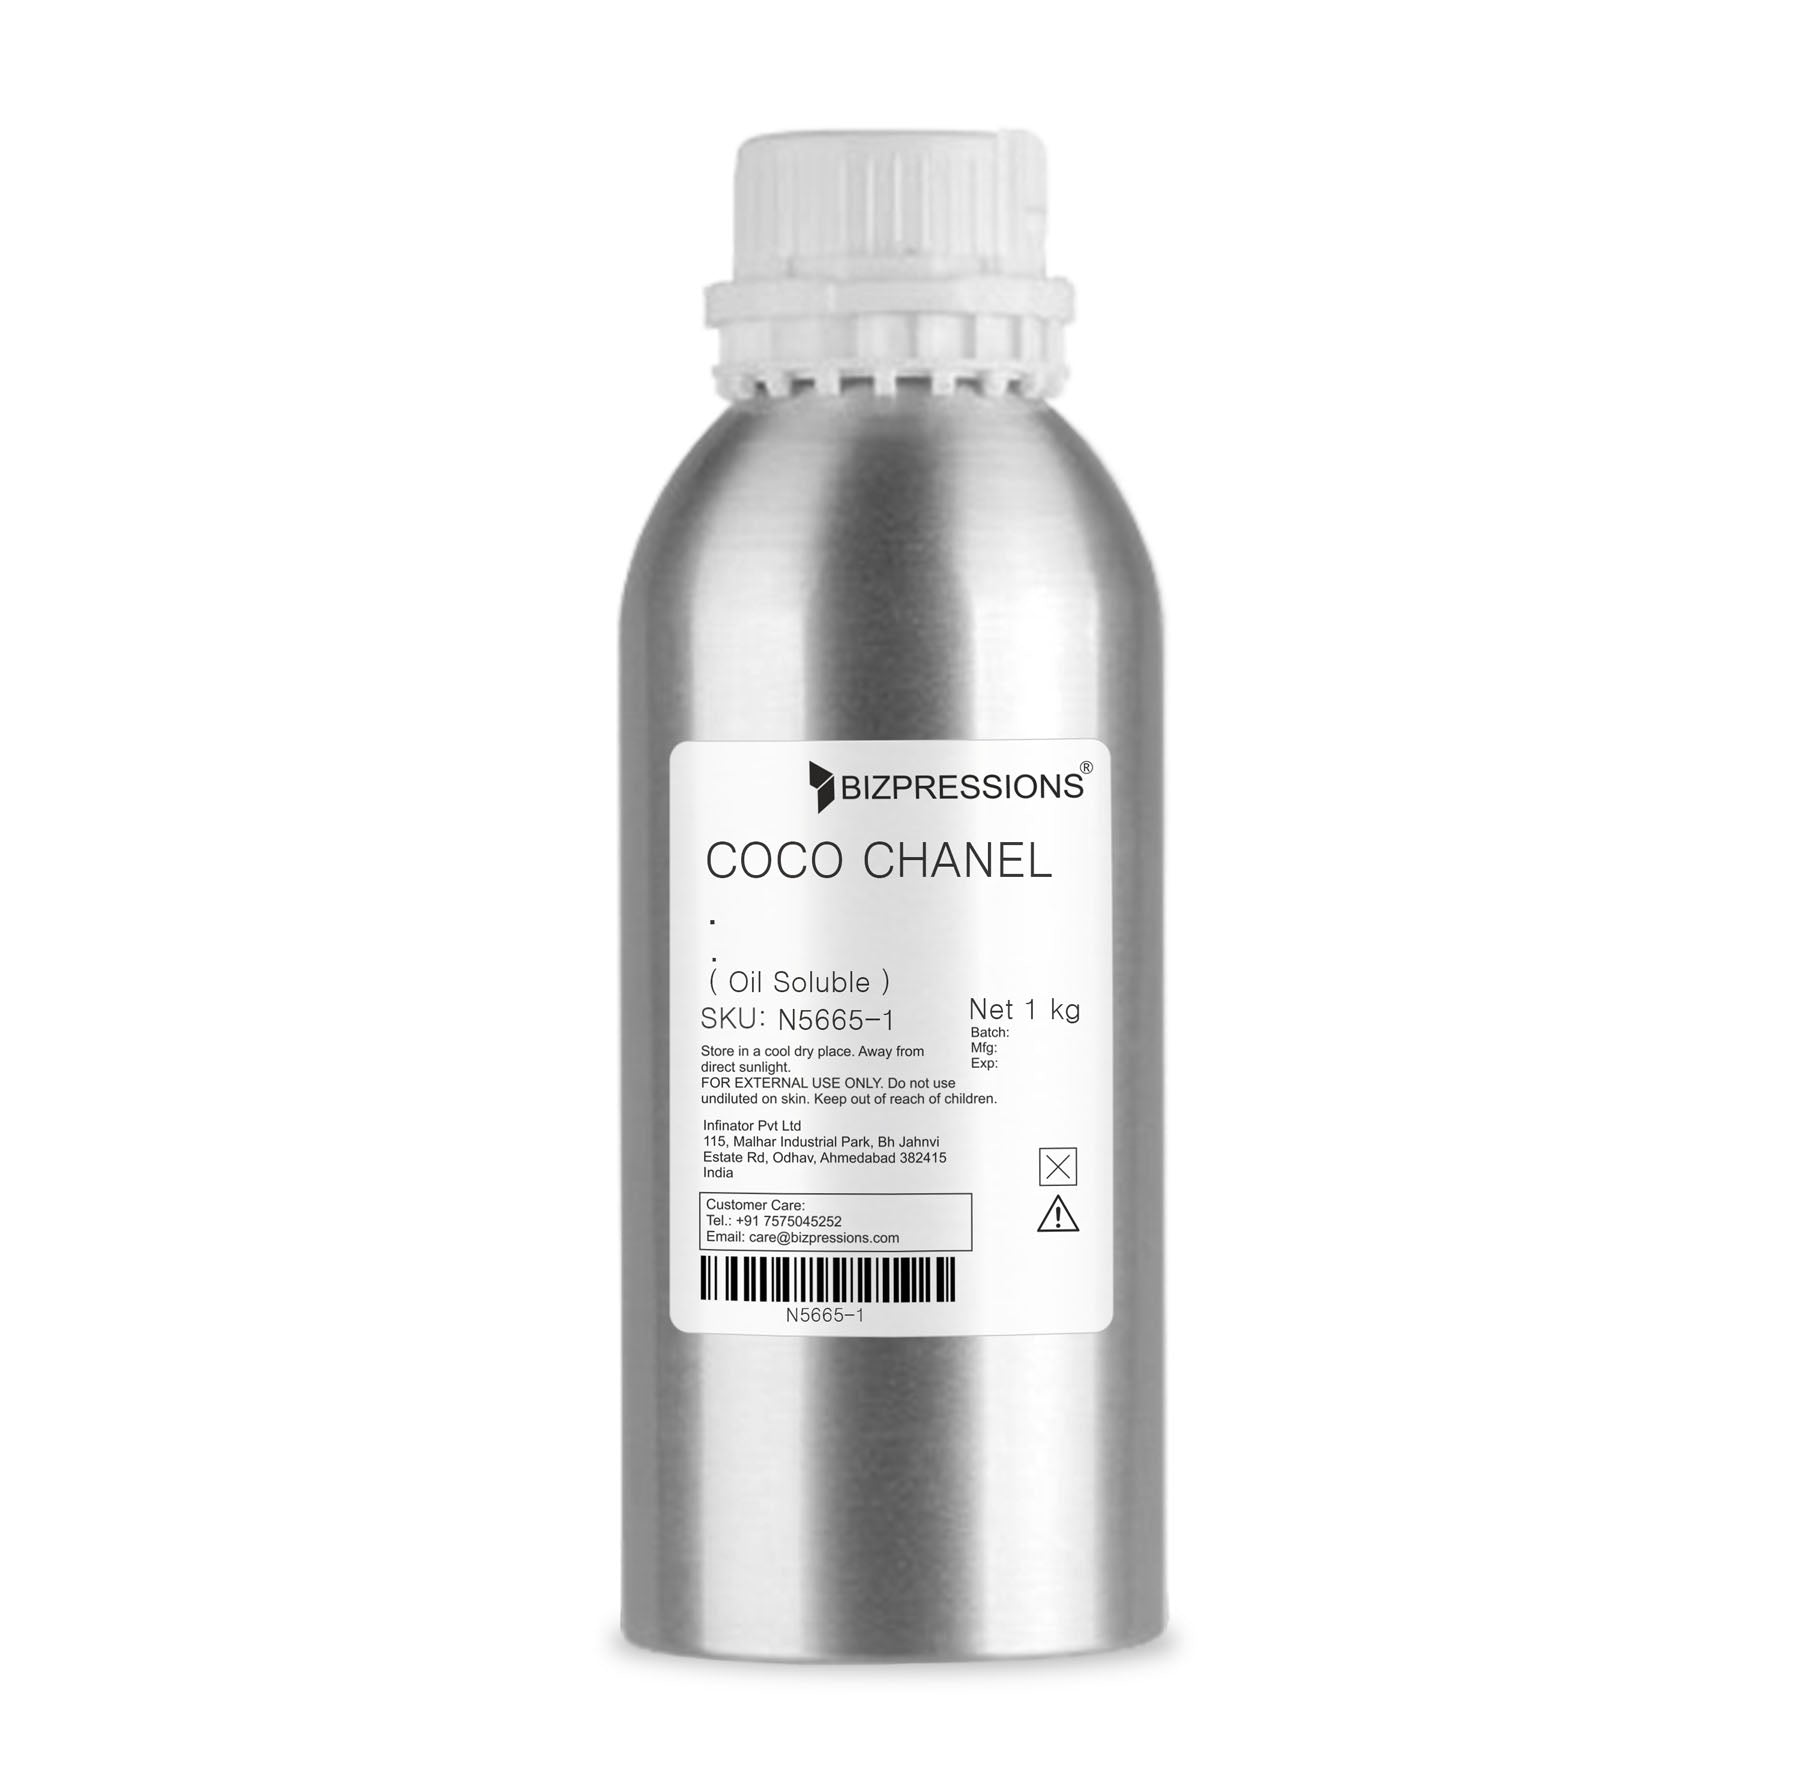 COCO CHANEL - Fragrance ( Oil Soluble ) - 5 kg